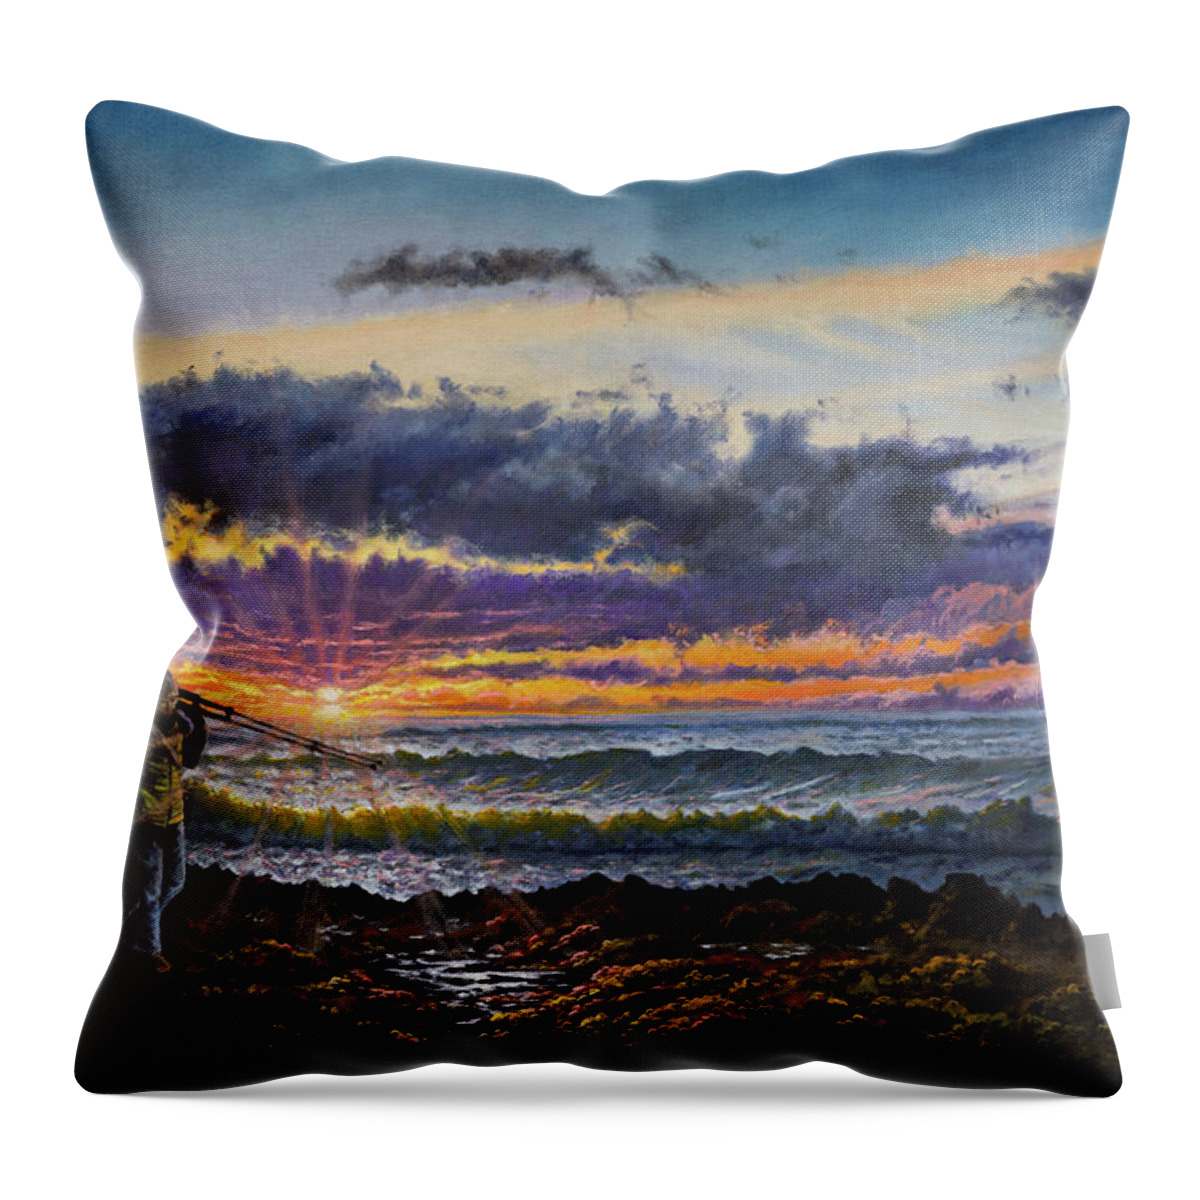 Bob Ross Style Throw Pillow featuring the painting The Landscape Photographer by Chris Steele